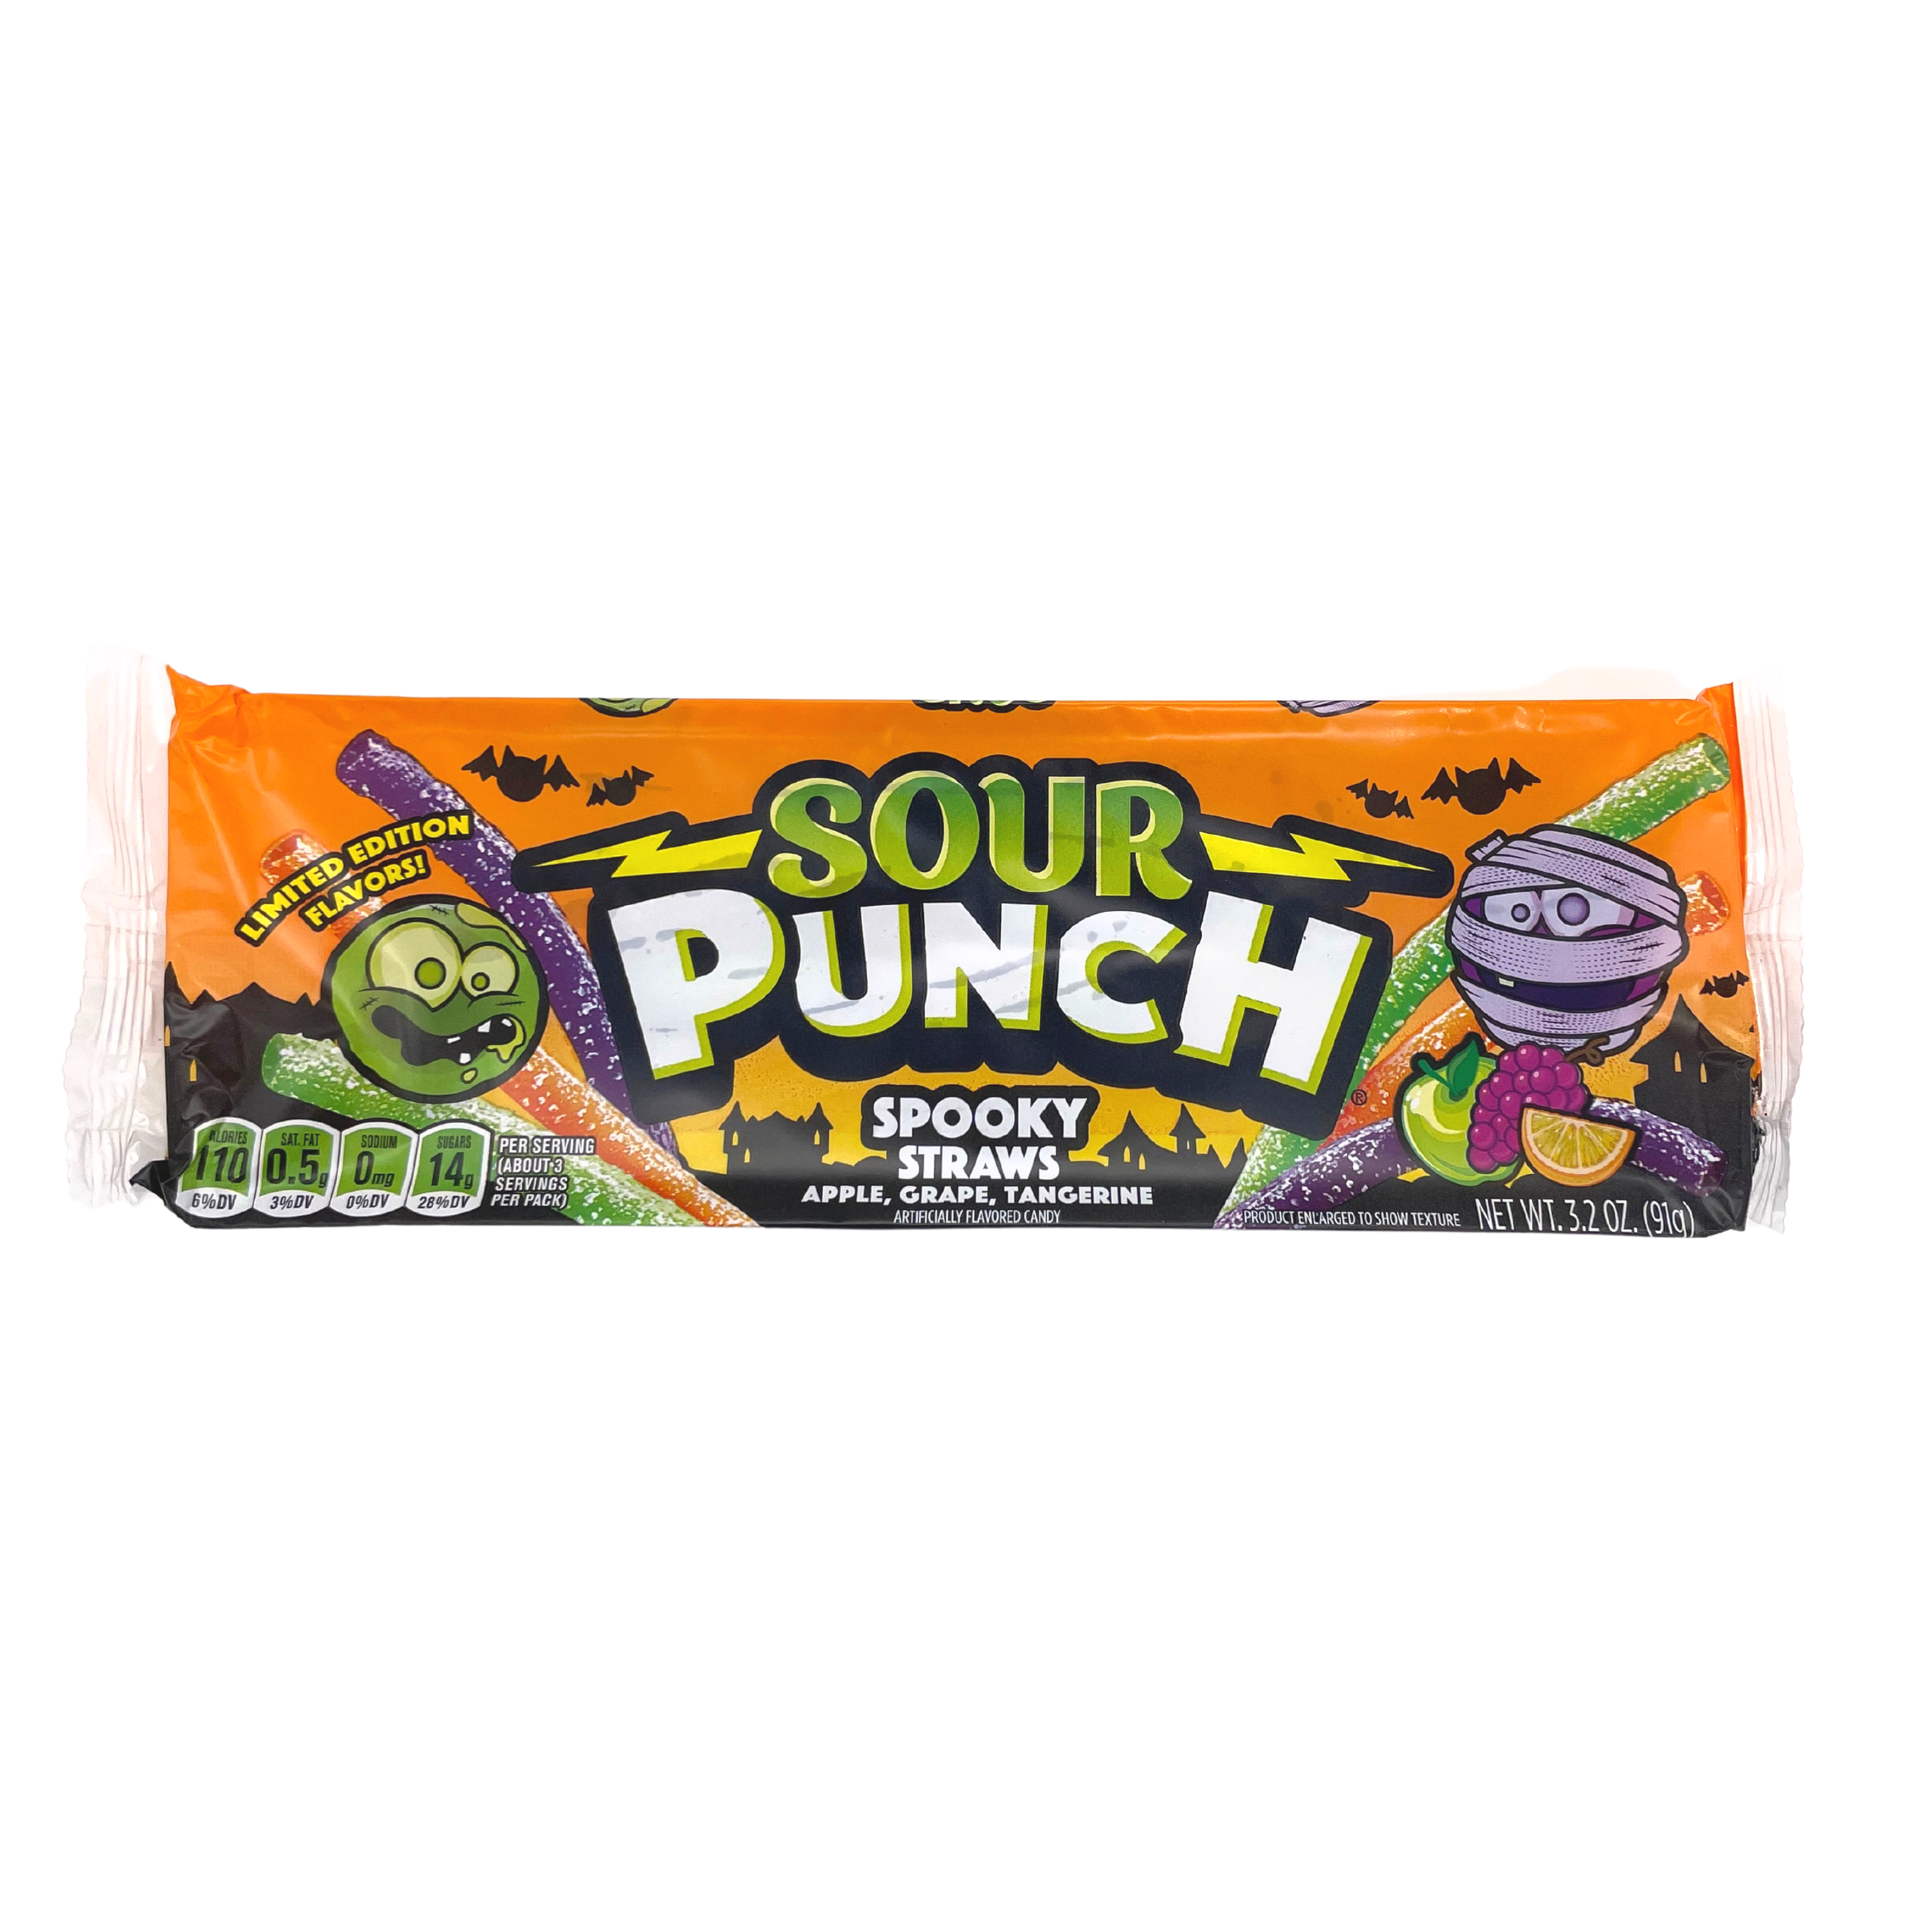 Sour Punch - Spooky Straws 91g LIMITED EDITION